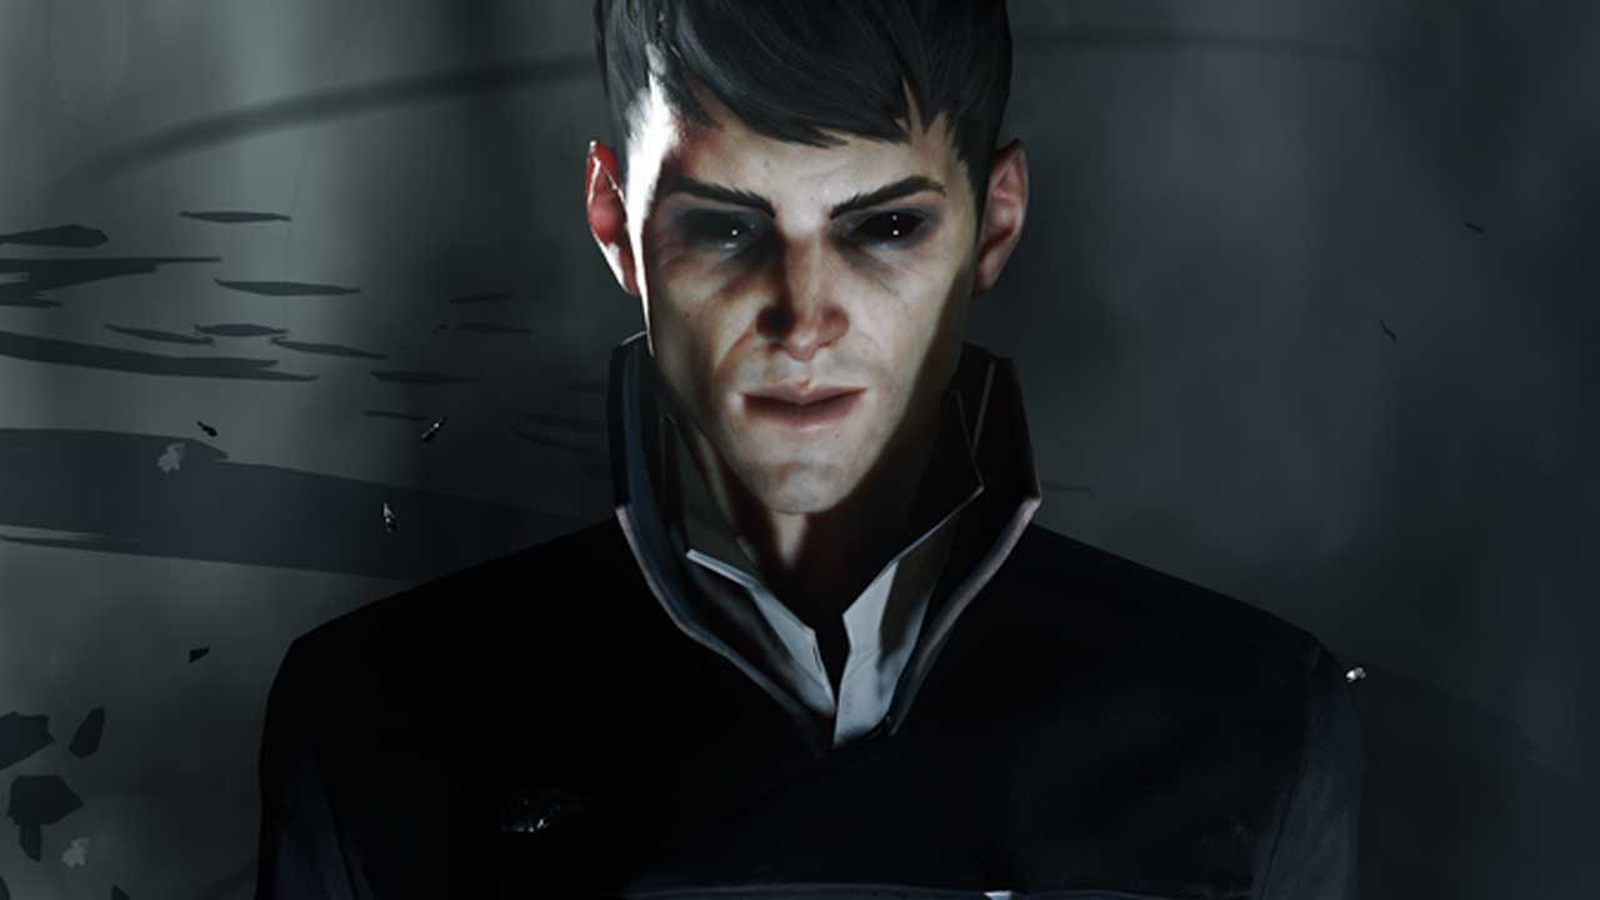 The Art of Dishonored 2, Dishonored Wiki